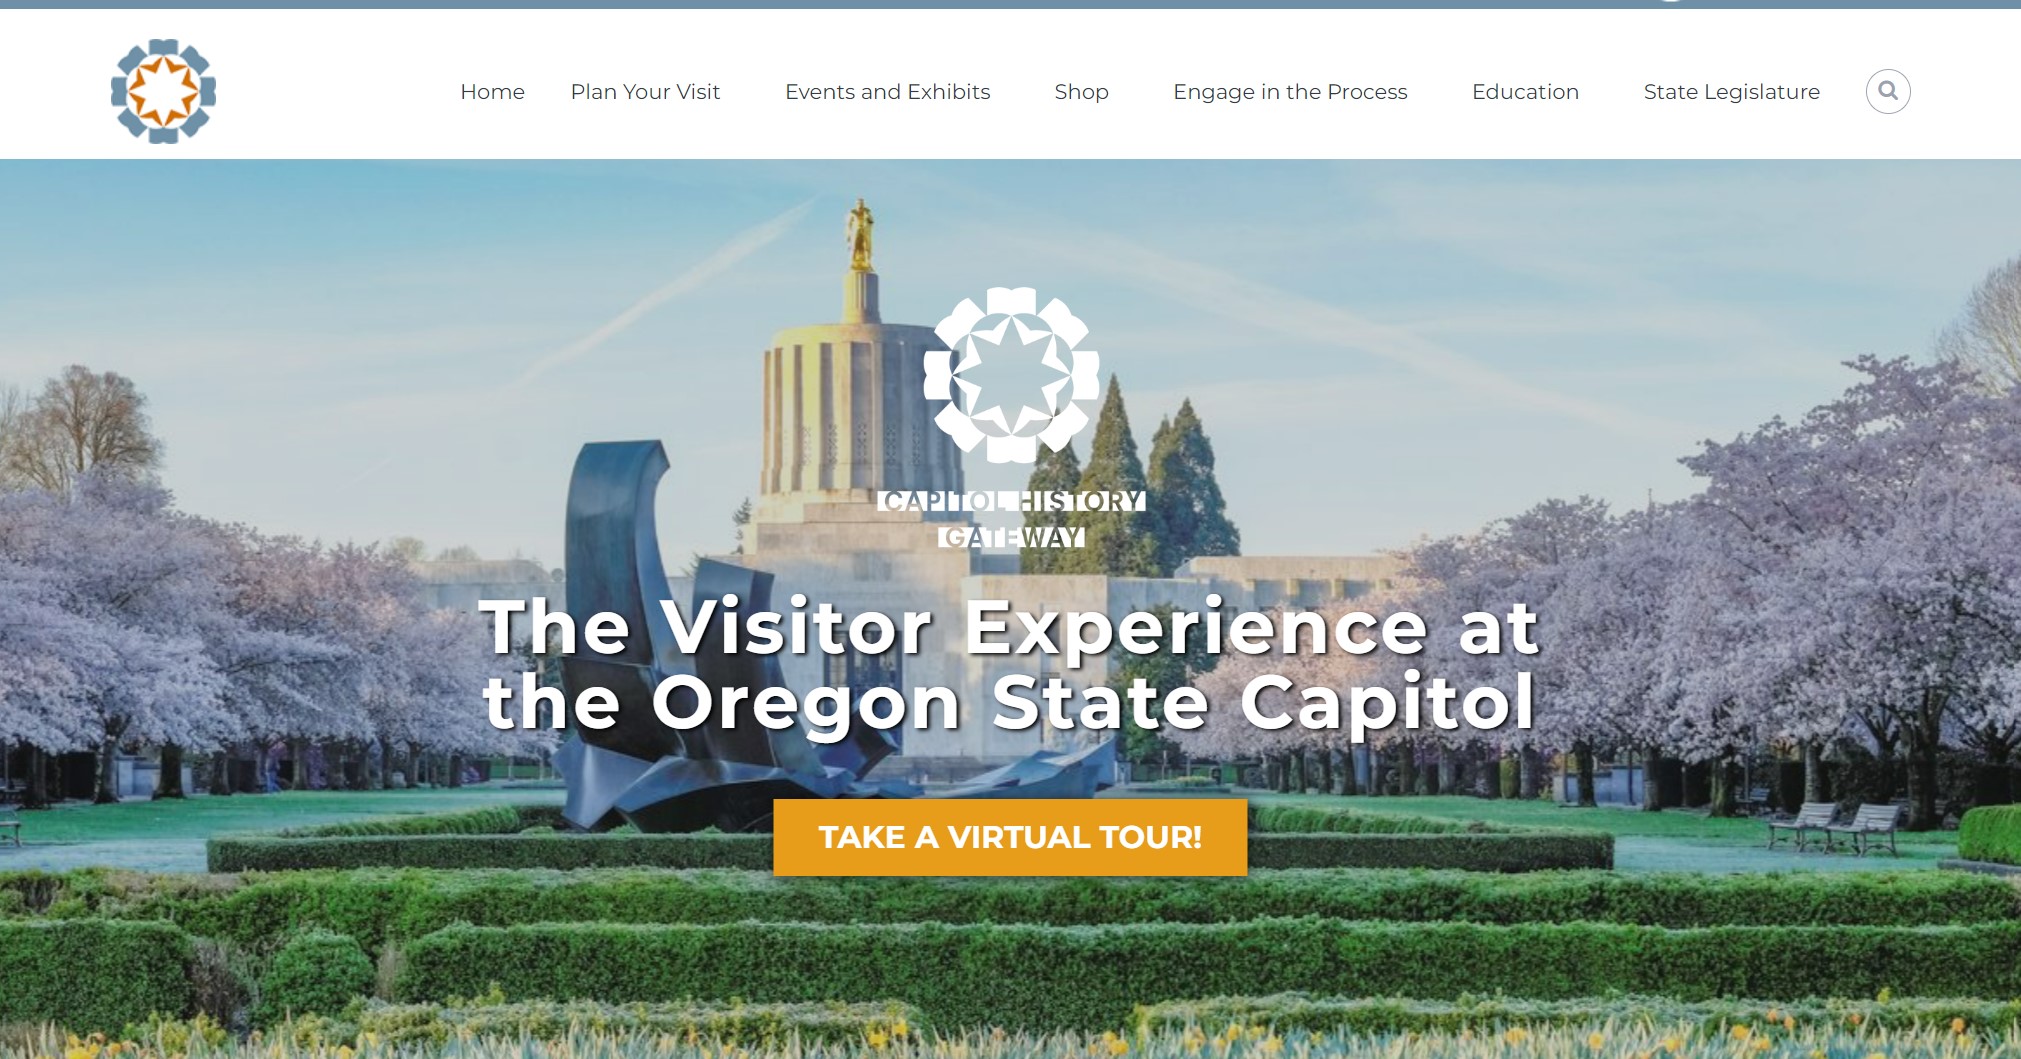 Visit the Oregon State Capitol